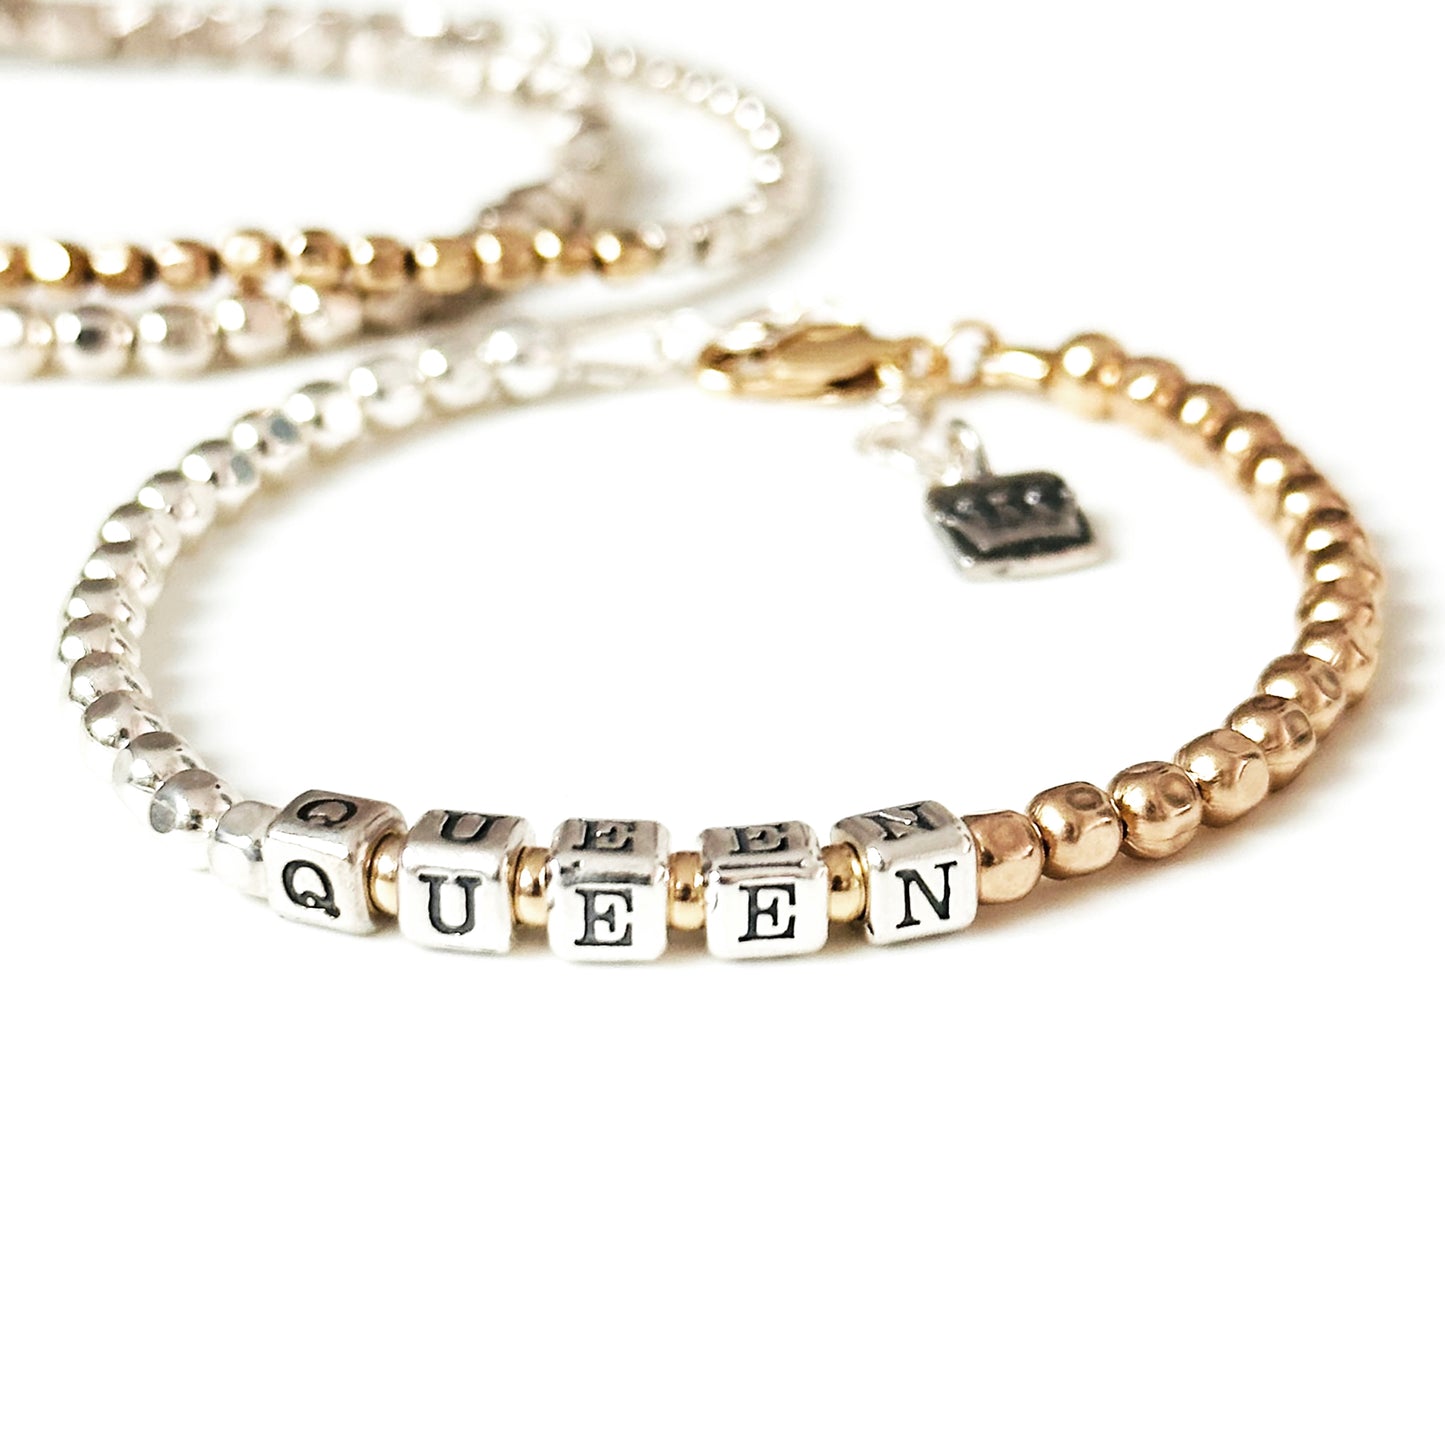 Queen Wear Your Crown Mixed Metals Sterling and 14k Gold Woman's Bracelet